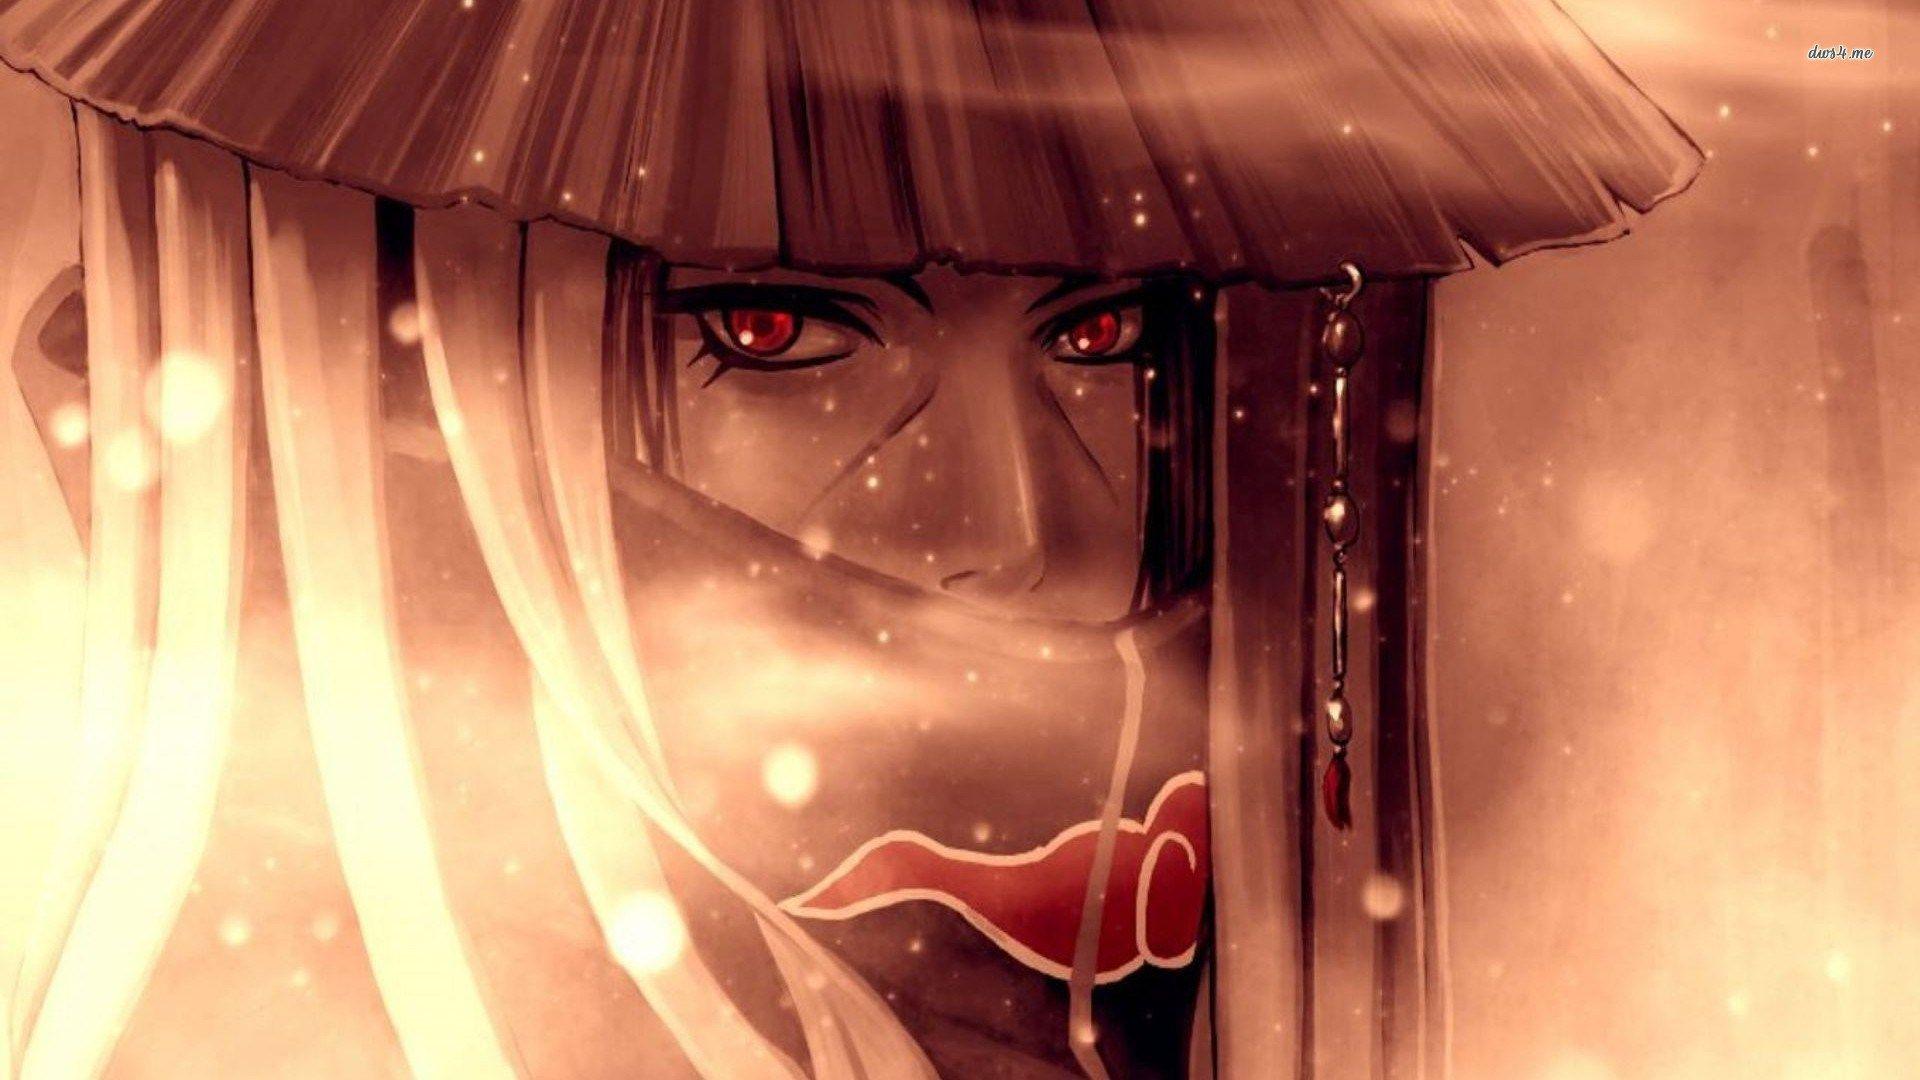 Why is Itachi Uchiha so loved? Analysis by Anime Heads. Anime